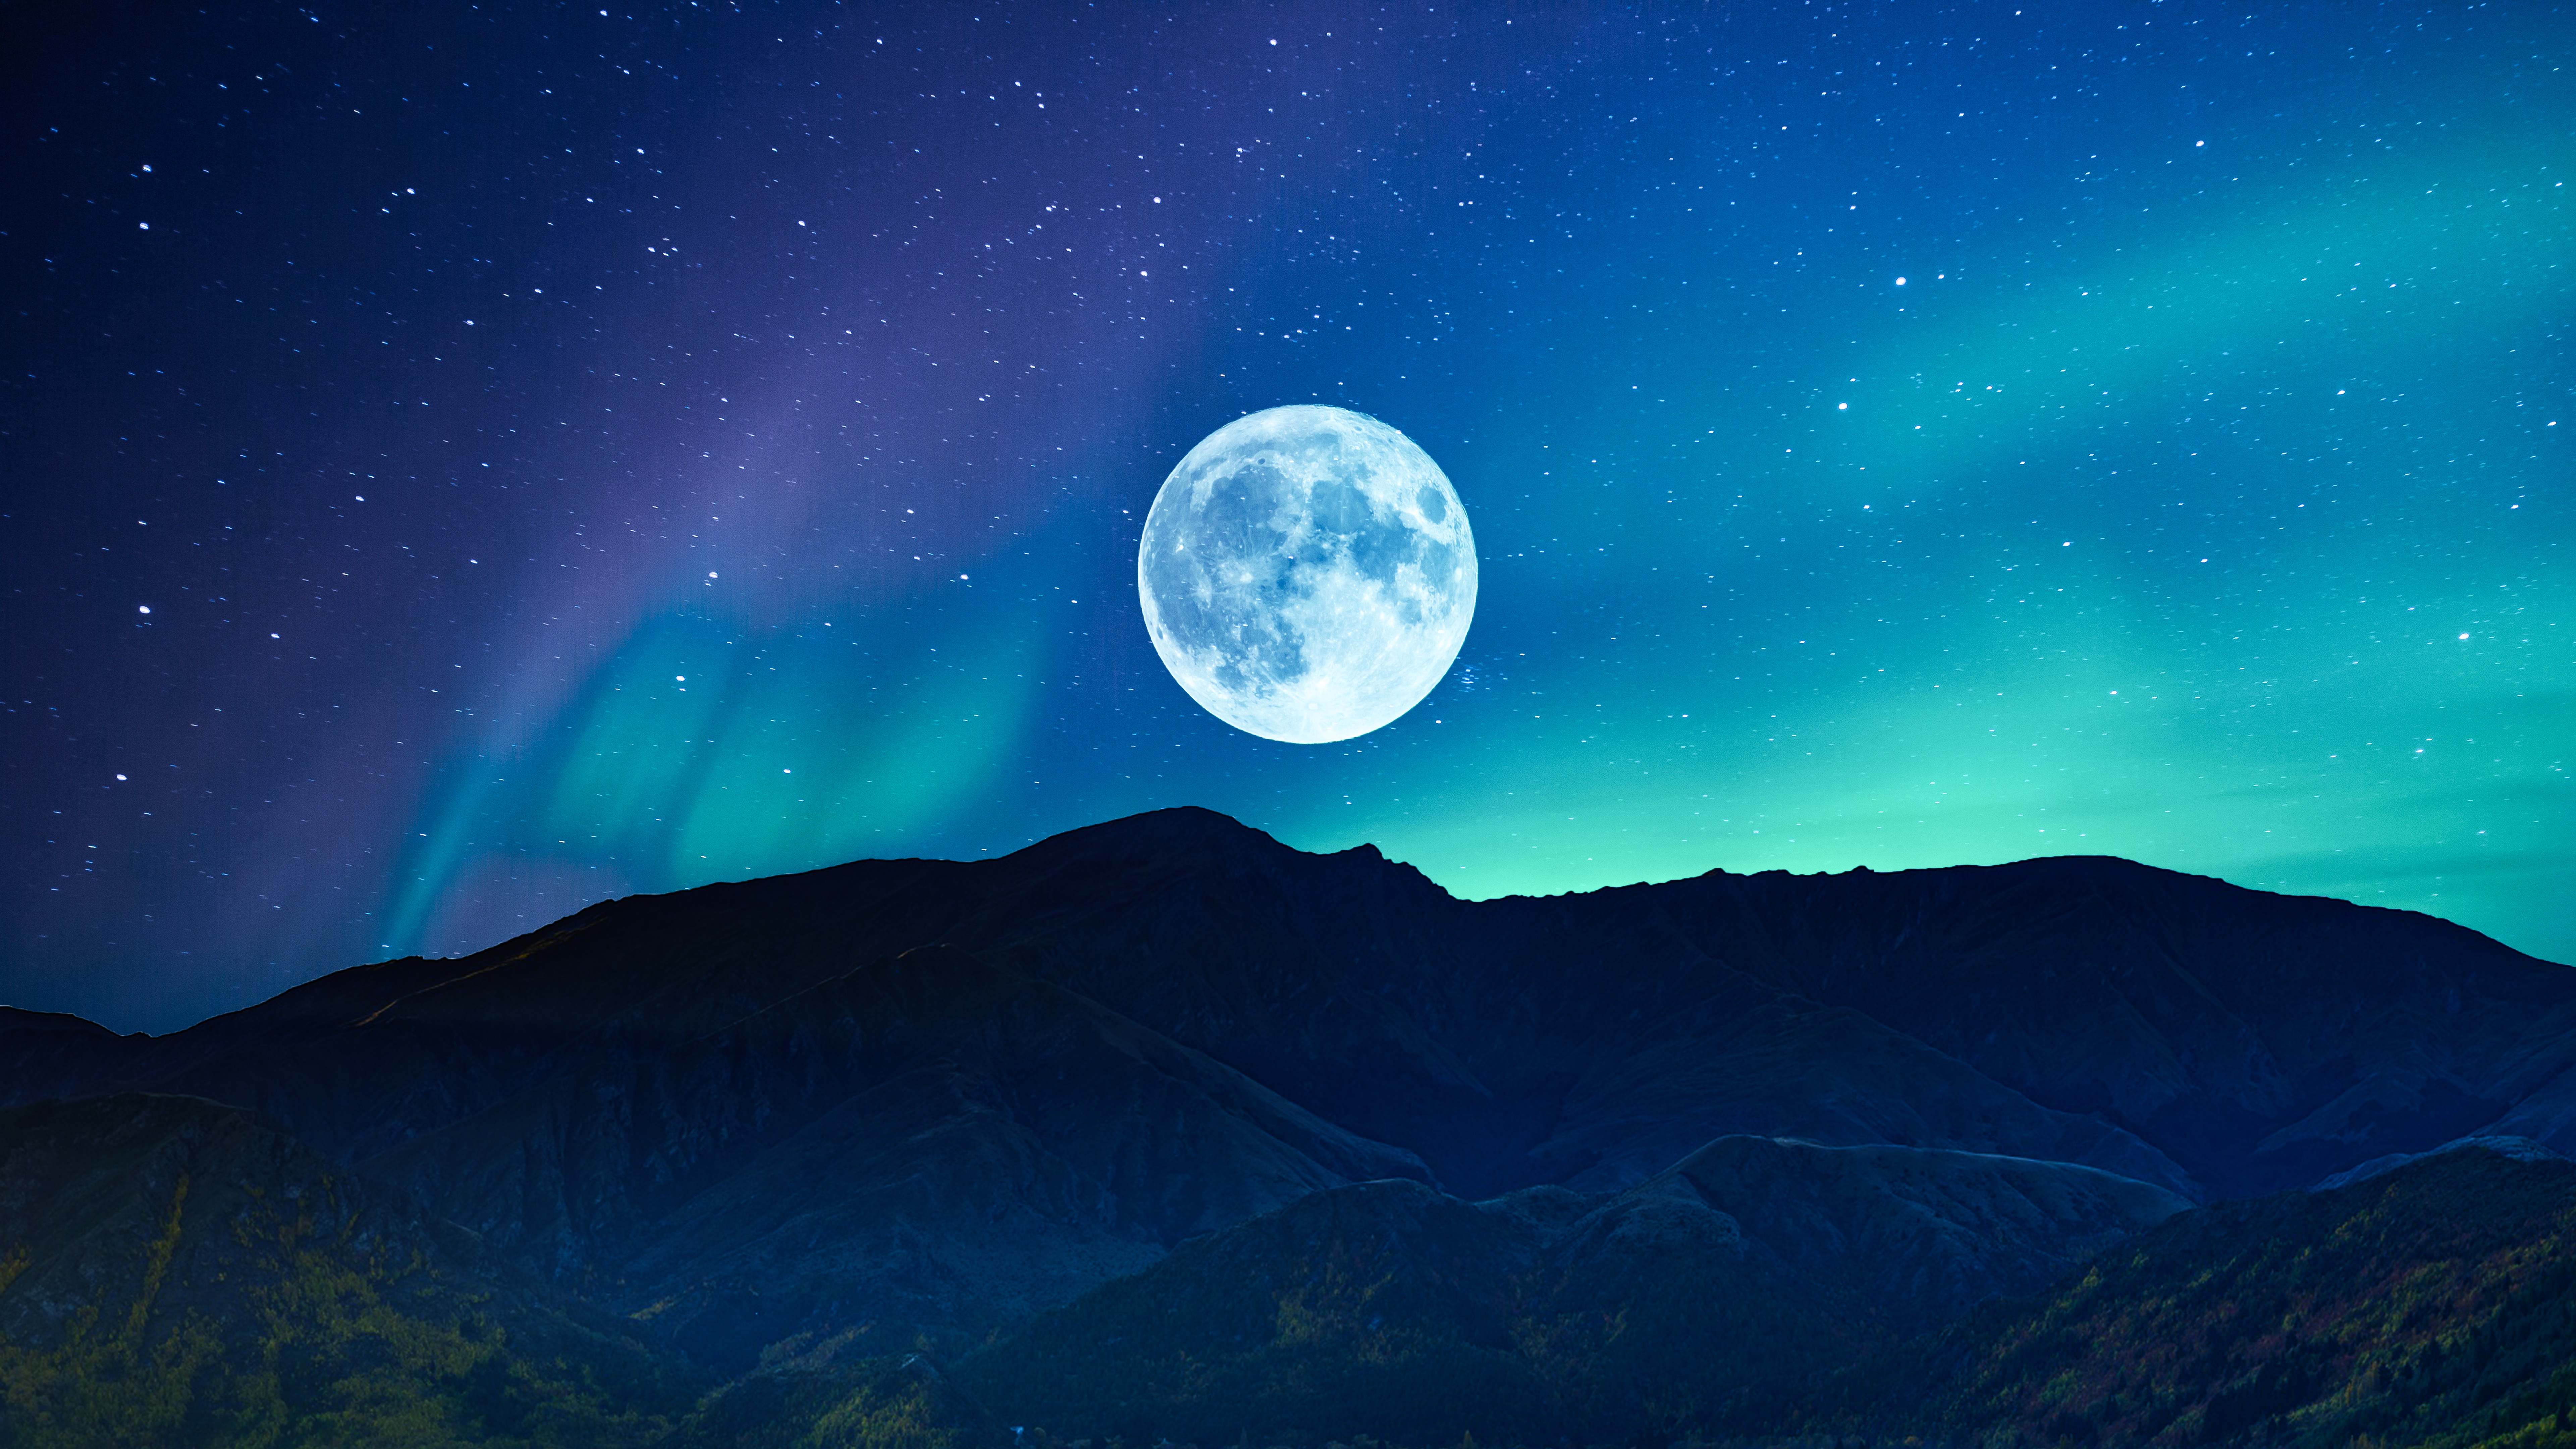 4K Wallpaper of Aurora Glowing over Snowy Mountains for PC Desktop